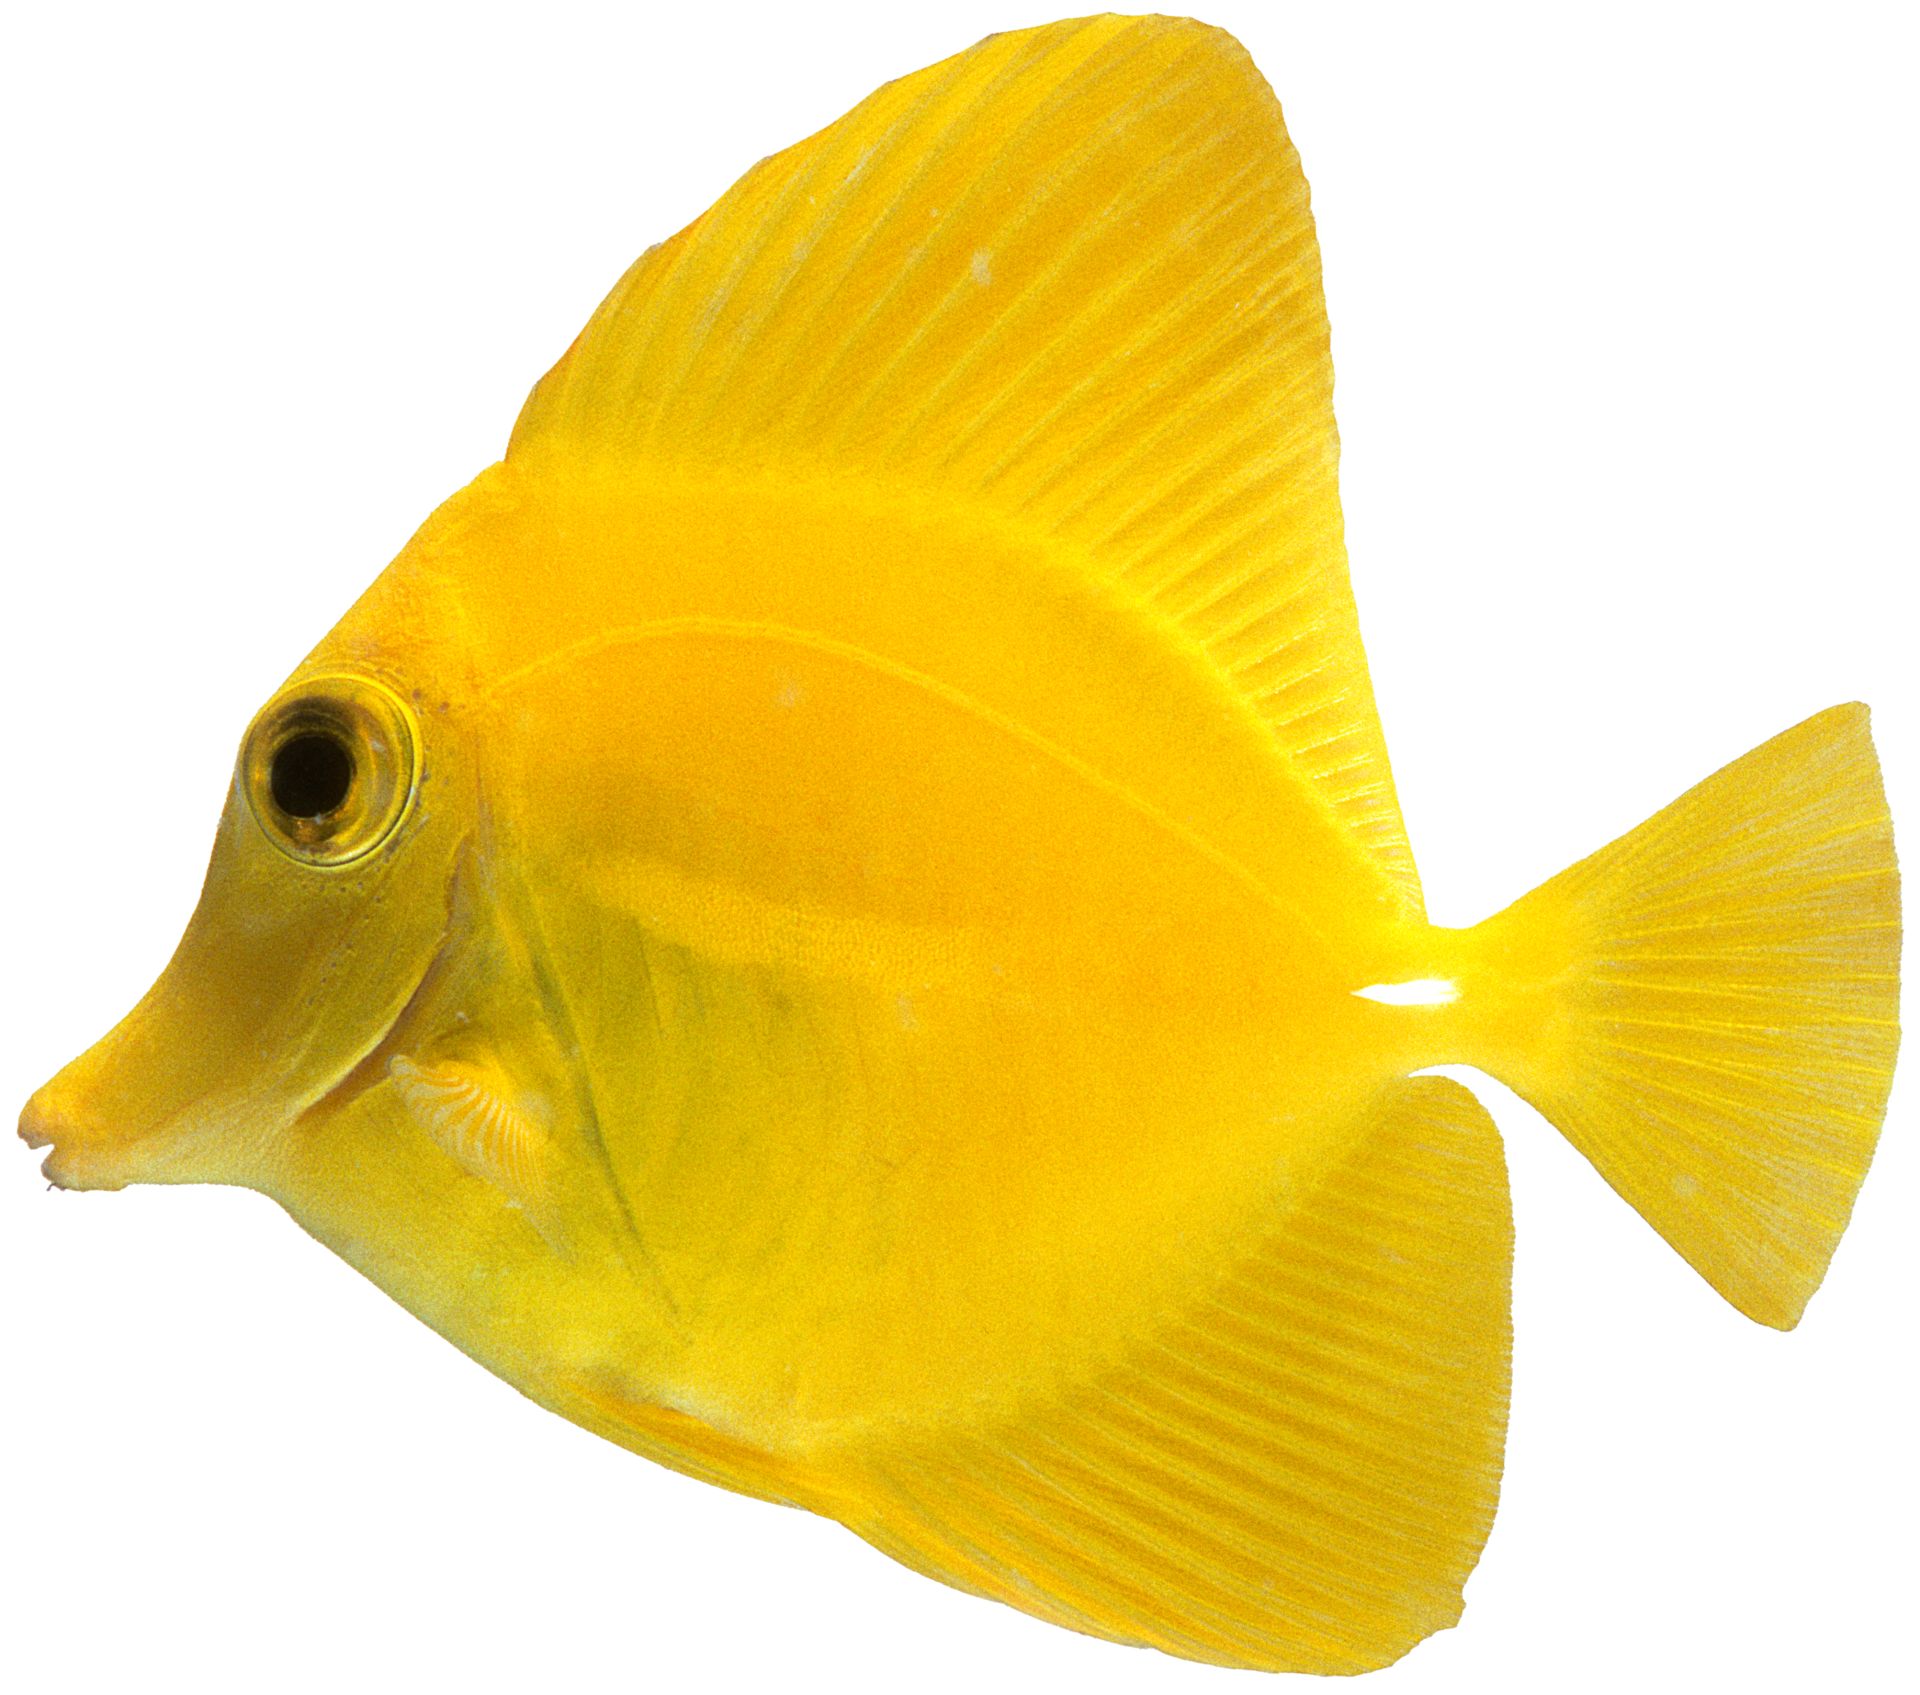 Yellow Tang | Yellow Tang Fish Facts | DK Find Out